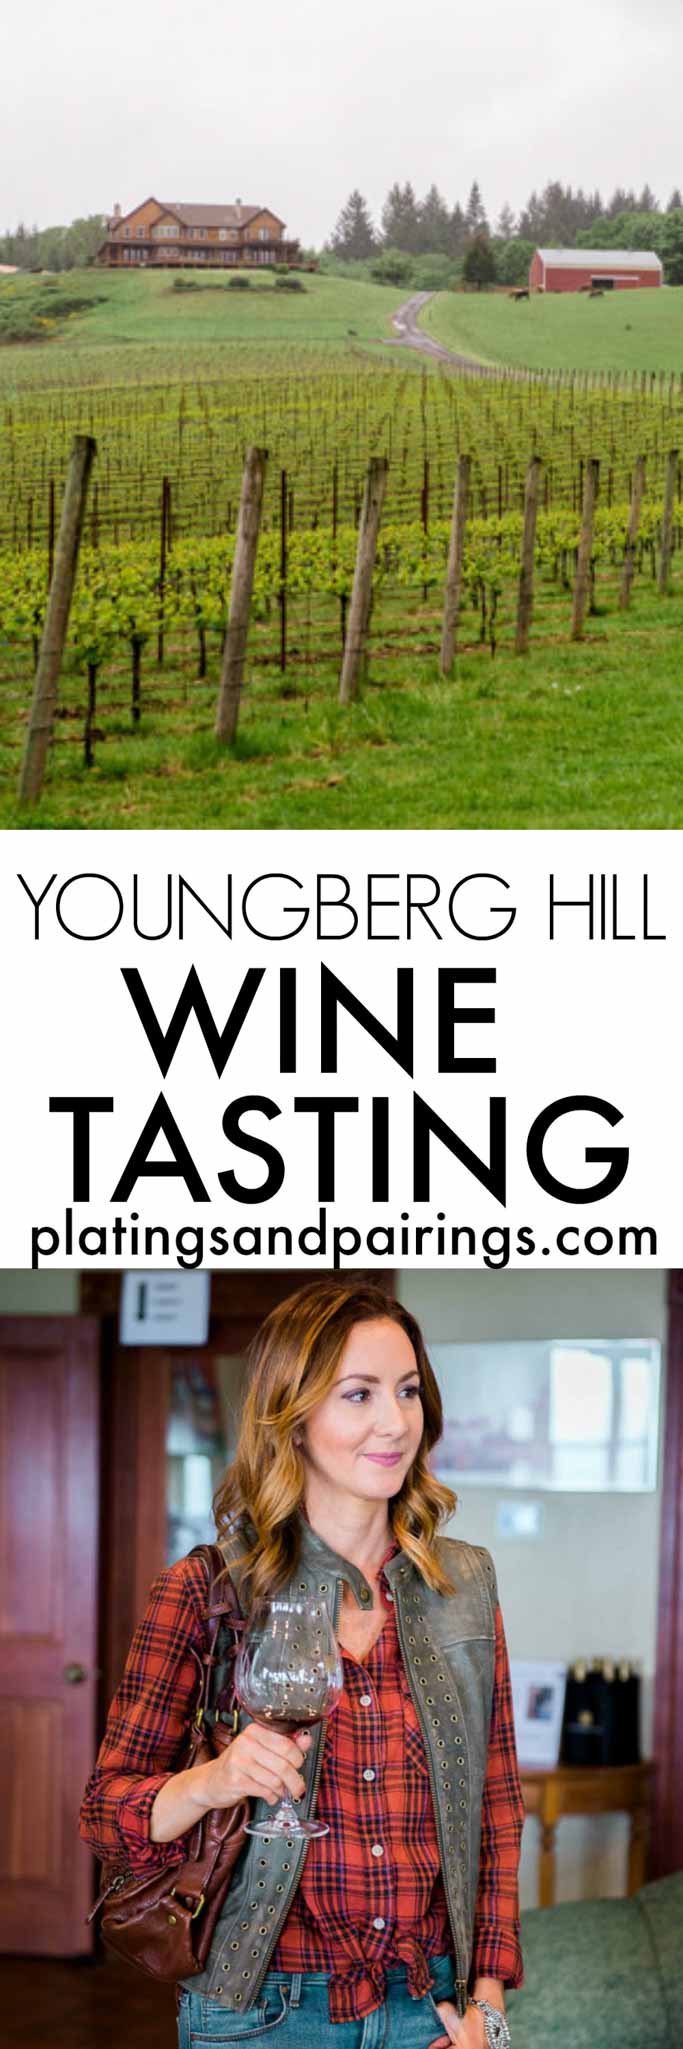 Youngberg Hill Vineyard believes in producing unmanipulated wines - allowing the true nature of the vintage to shine through. Visit them in McMinnville, Oregon for a tasting of Pinot Noir, Pinot Gris and Pinot Blanc | platingsandpairings.com